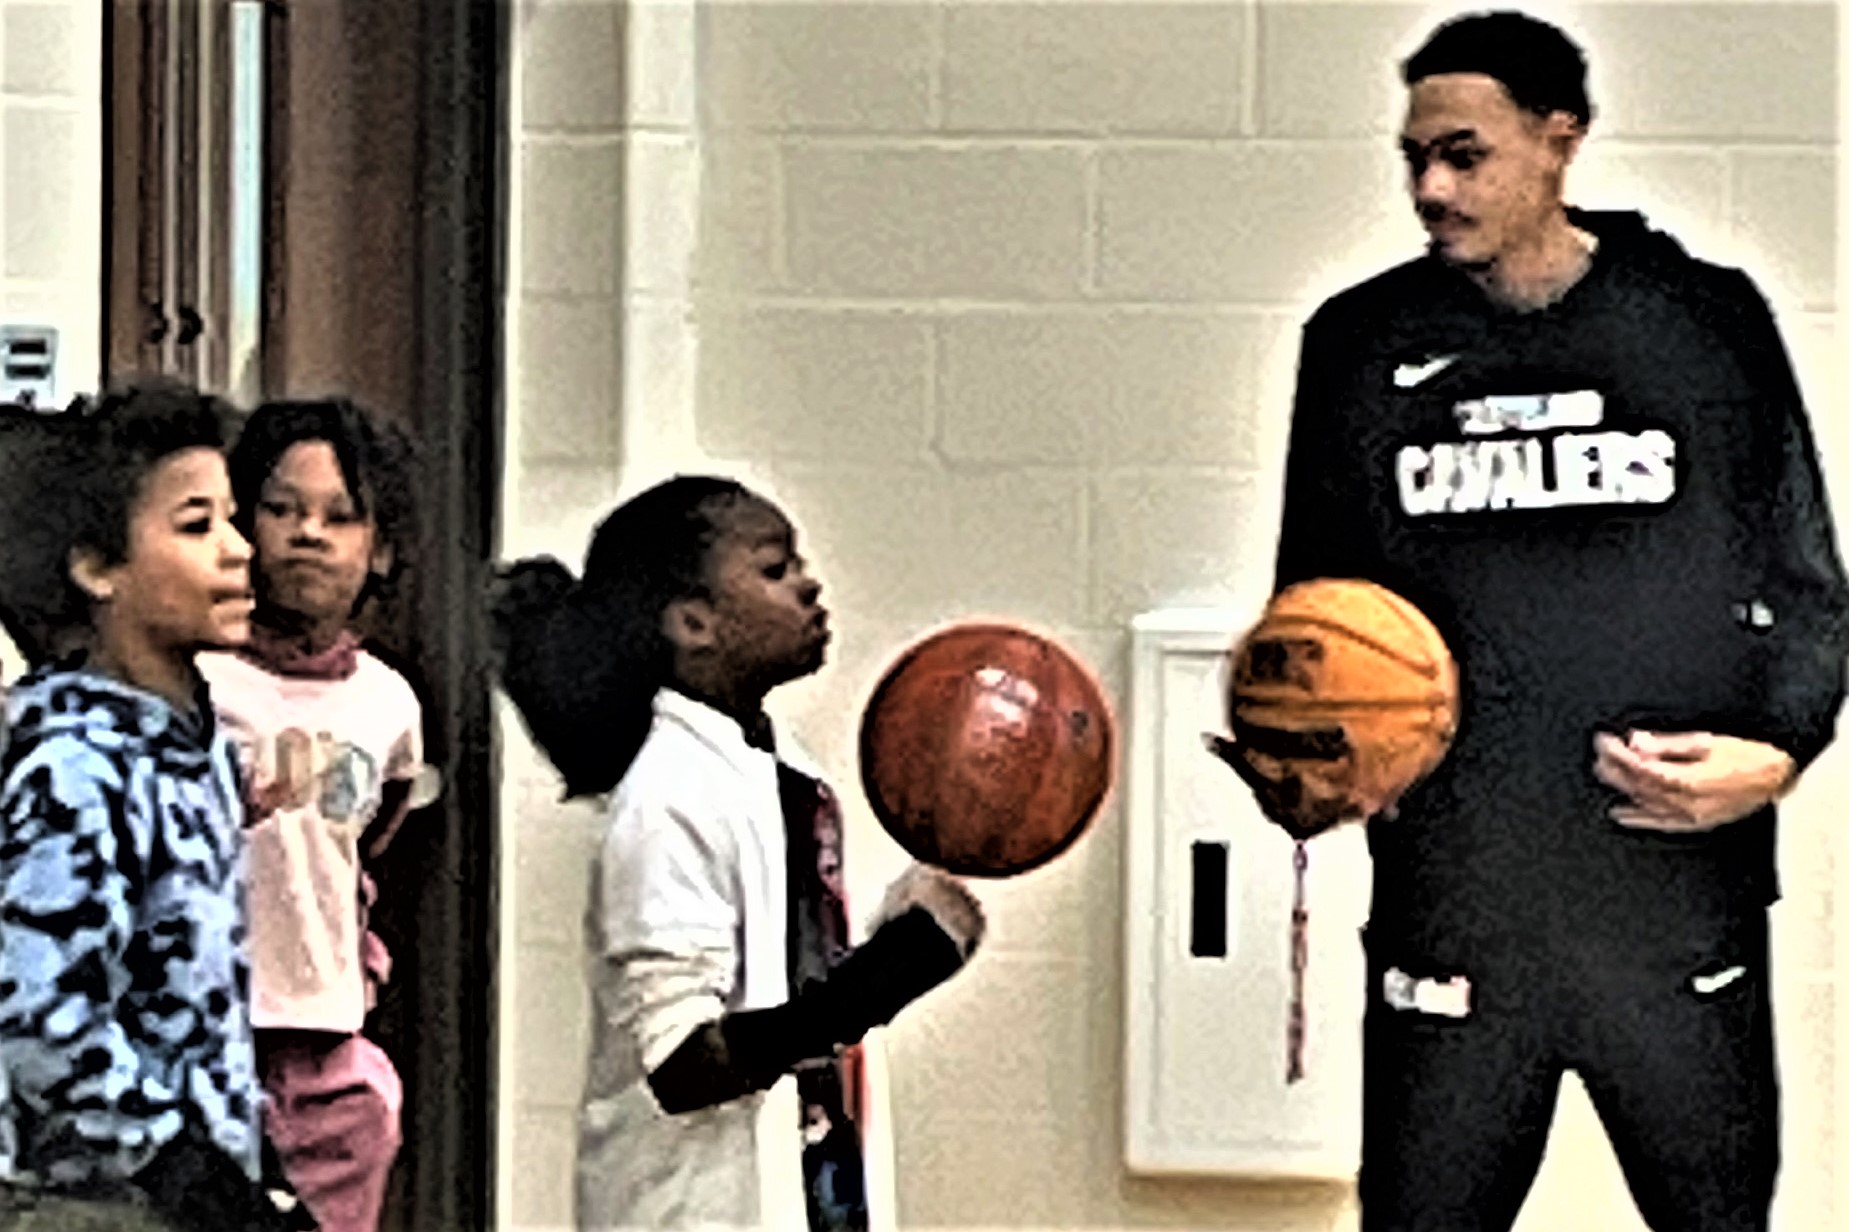 Students at the “J” learn fundamentals during recent Cavs Academy